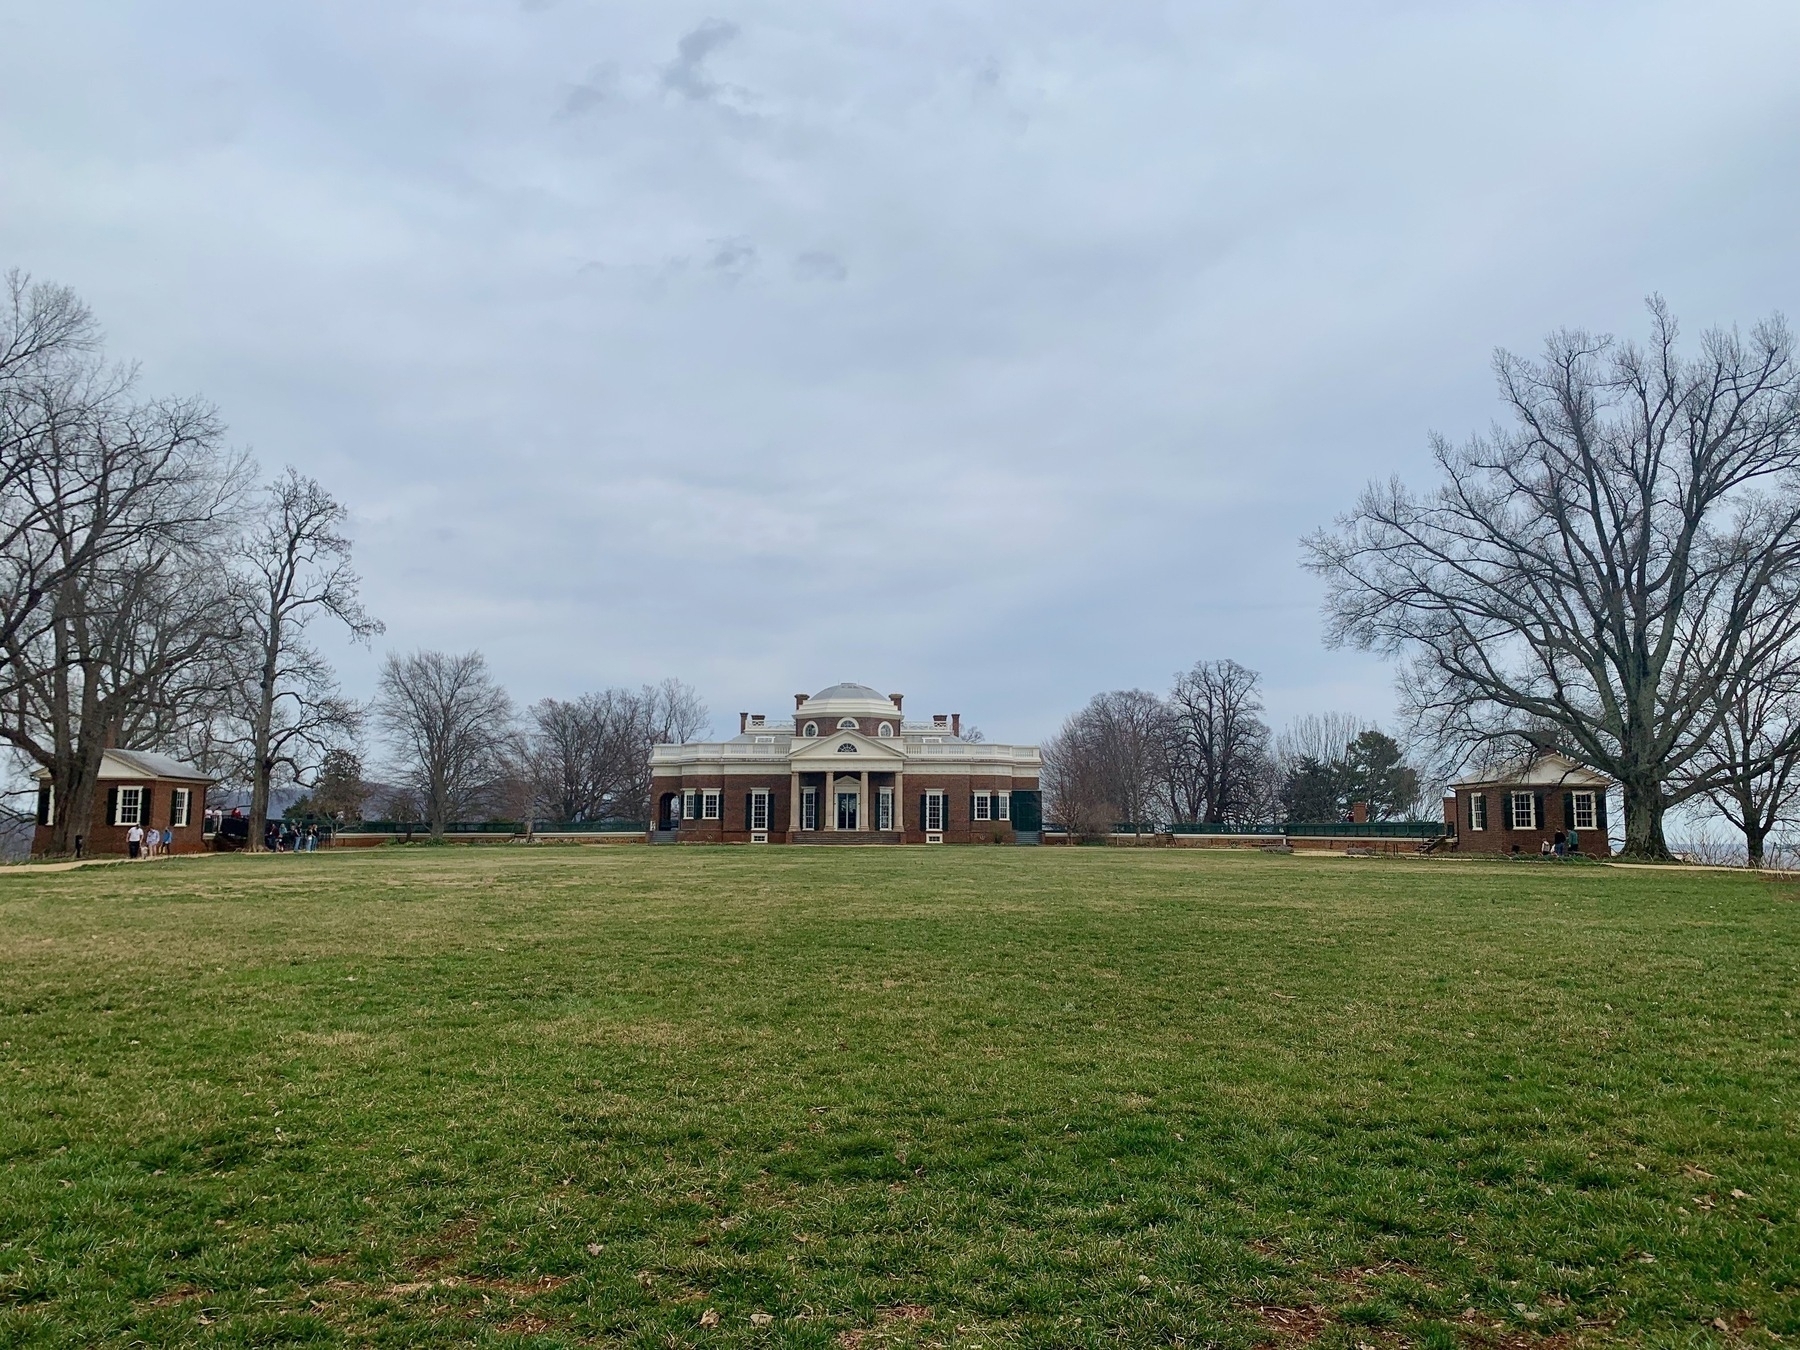 A view of Monticello from across the front lawn.